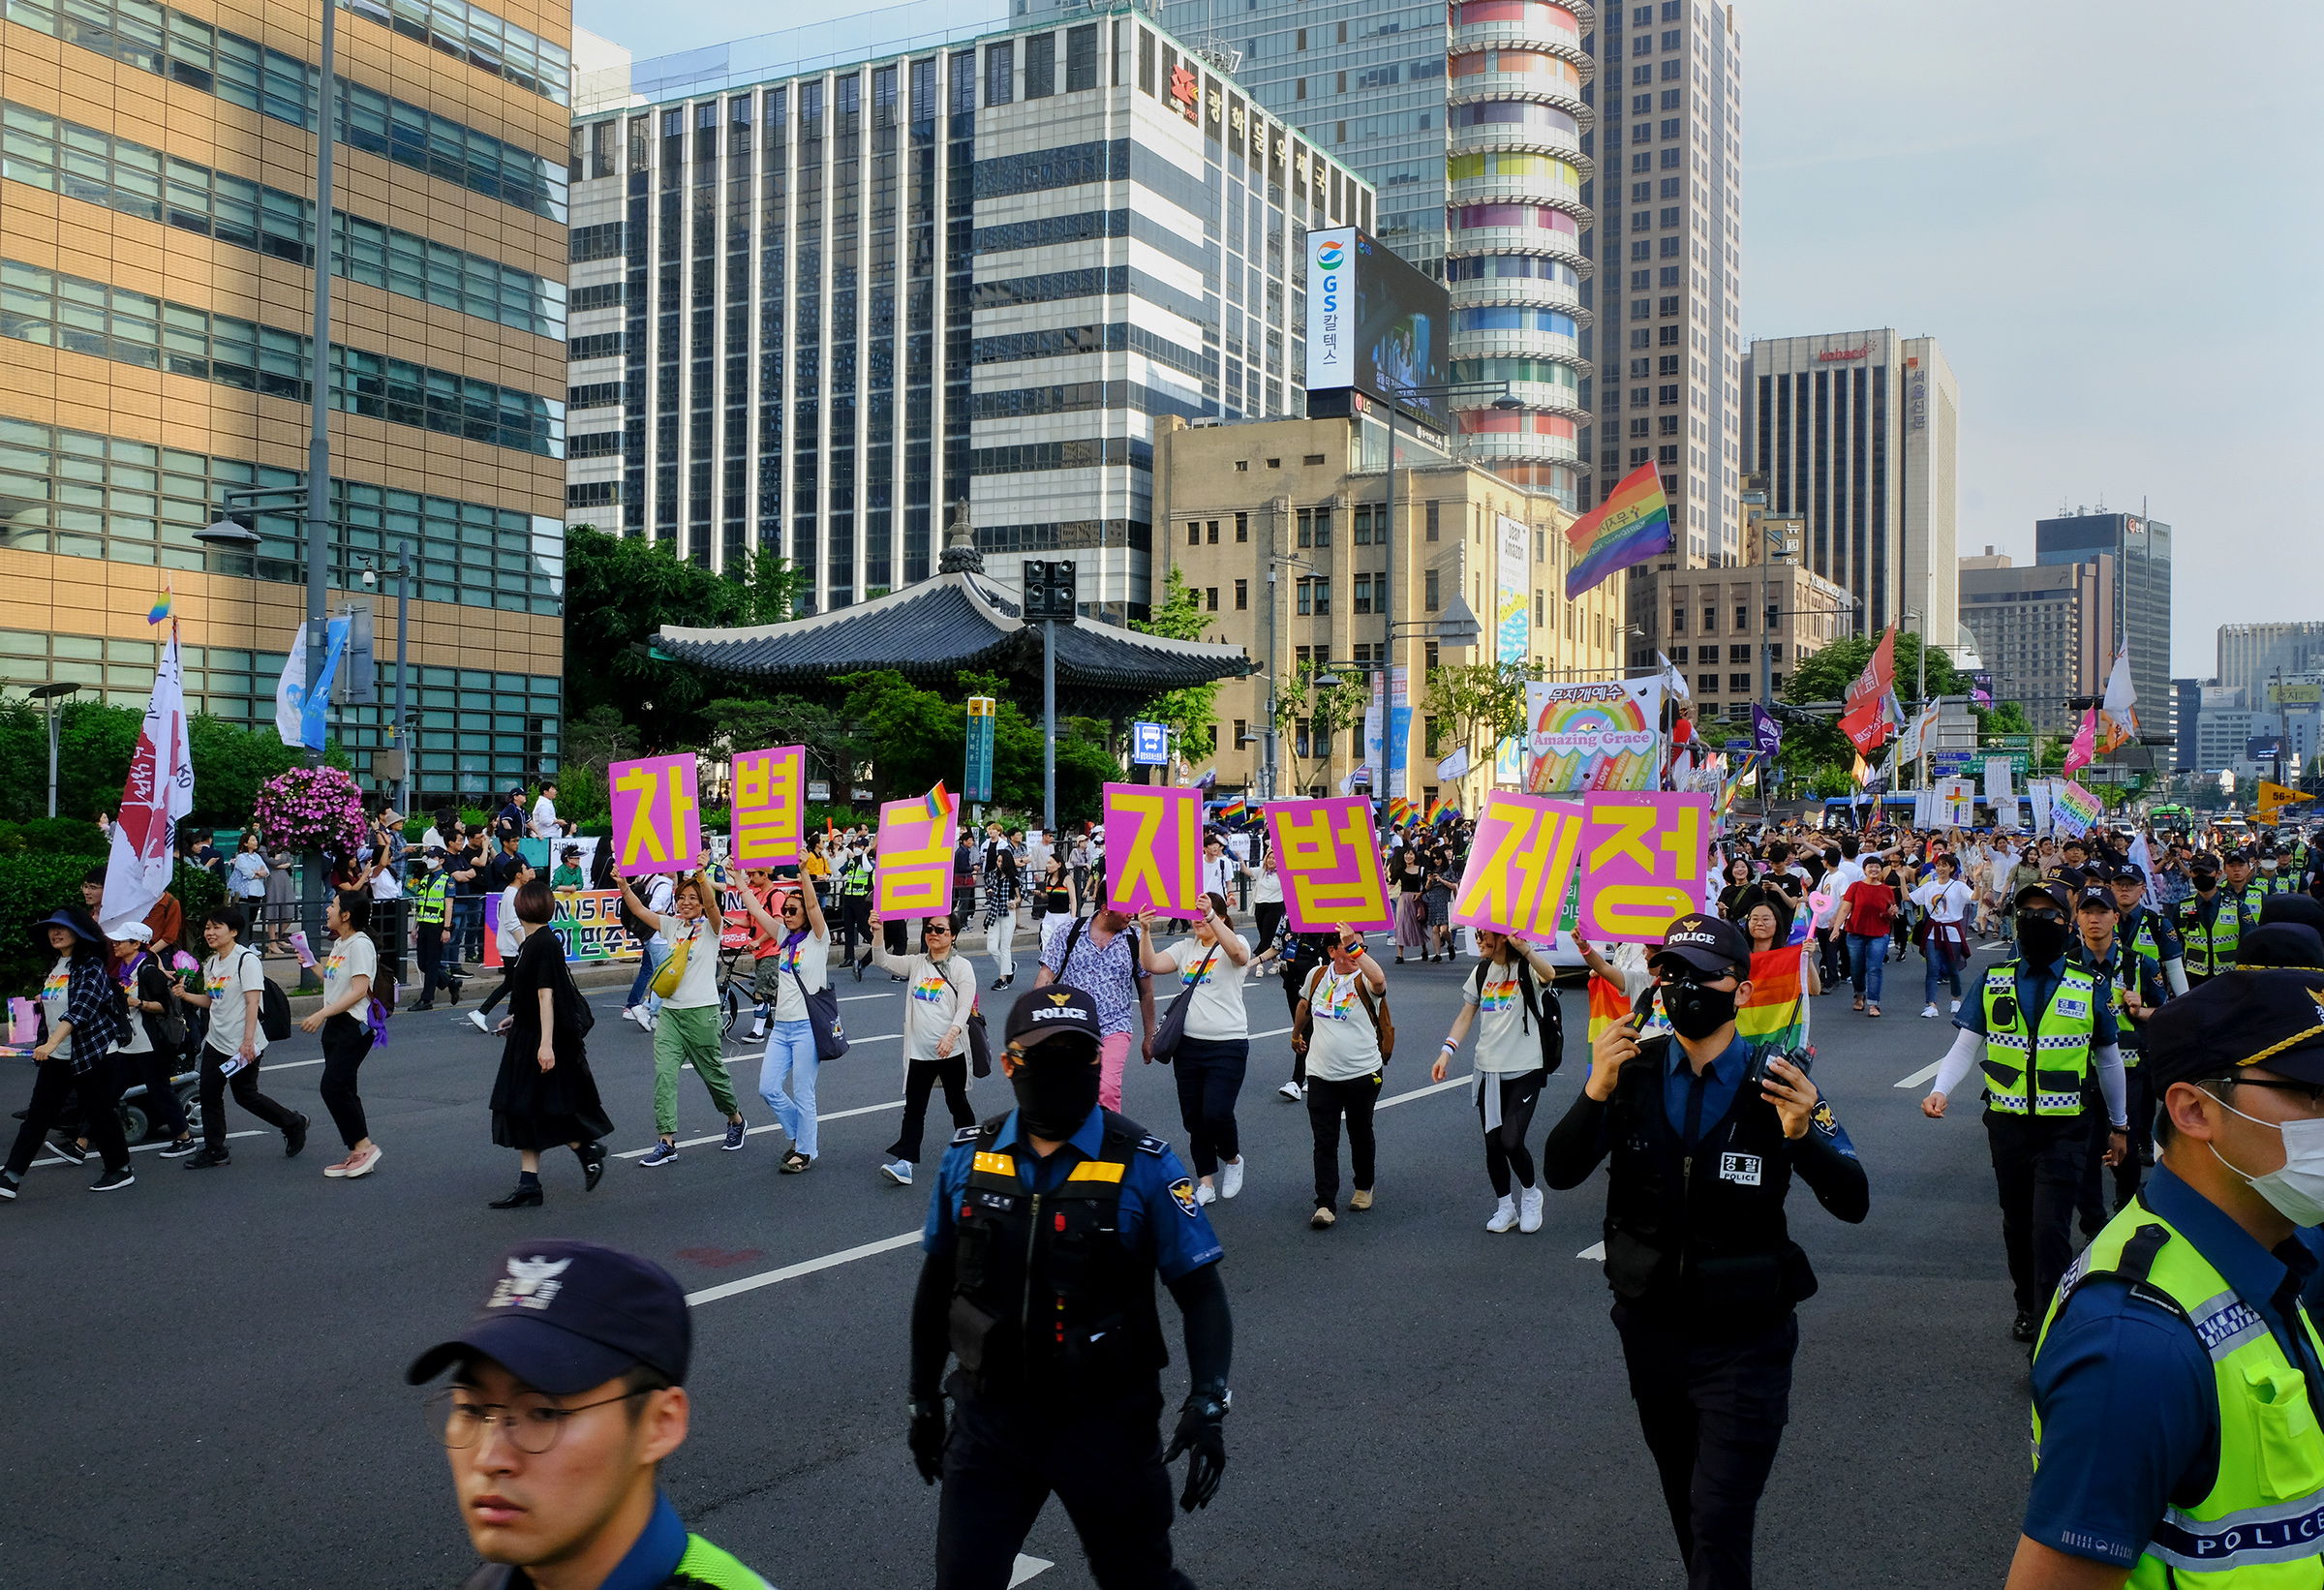 LGBTQ rights protesters hold signs that read, "Enact an Anti-Discrimination Law" at Gwanghwamun Plaza during the Seoul Queer Culture Festival on June 1, 2019. (Sangsuk Sylvia Kang)